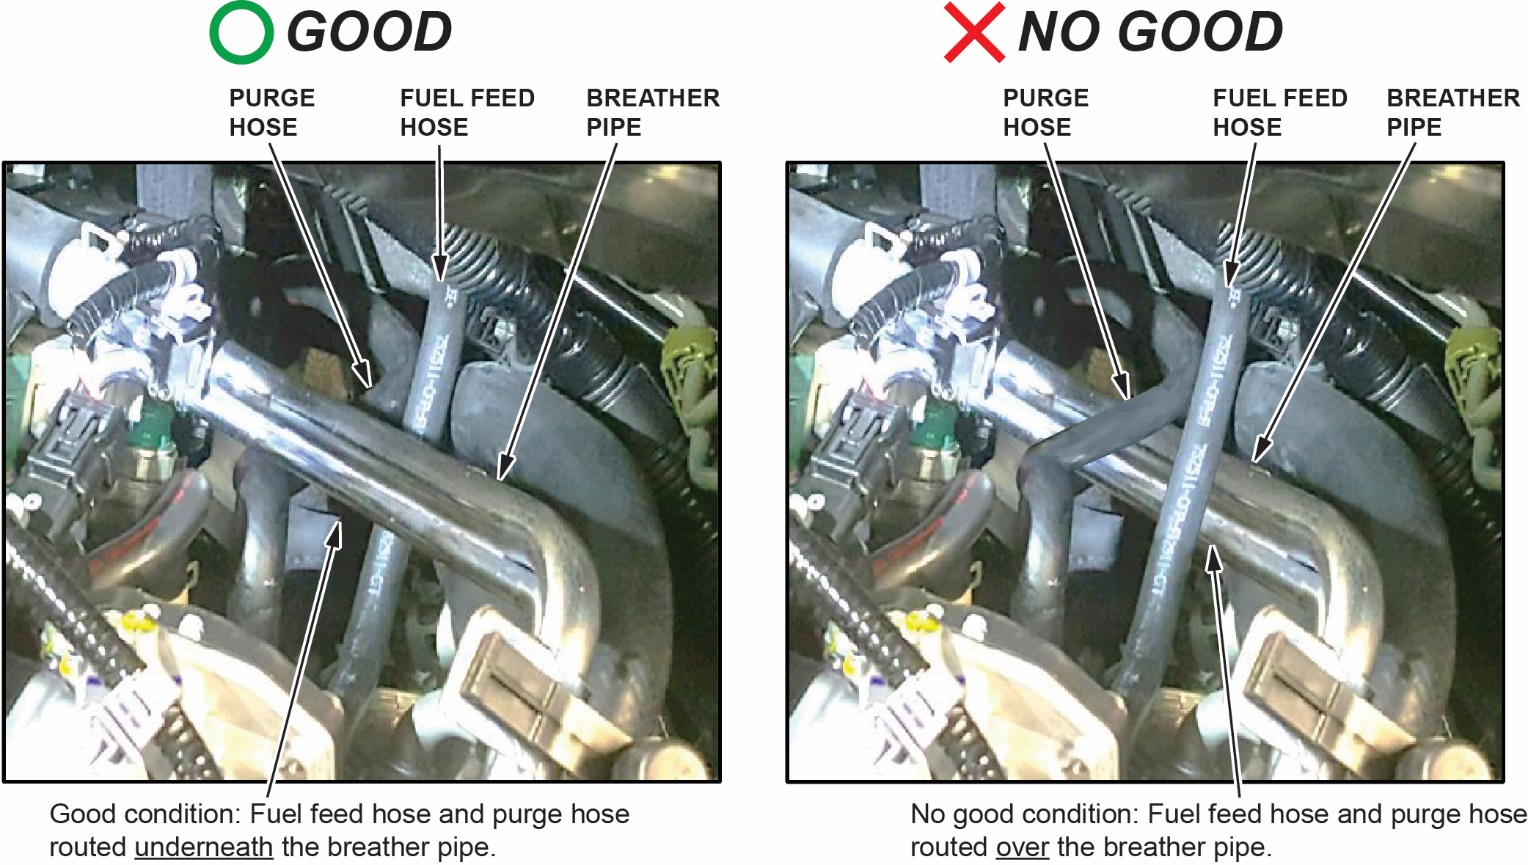 Check if the purge and fuel feed hose is routed underneath the breather pipe and not above it